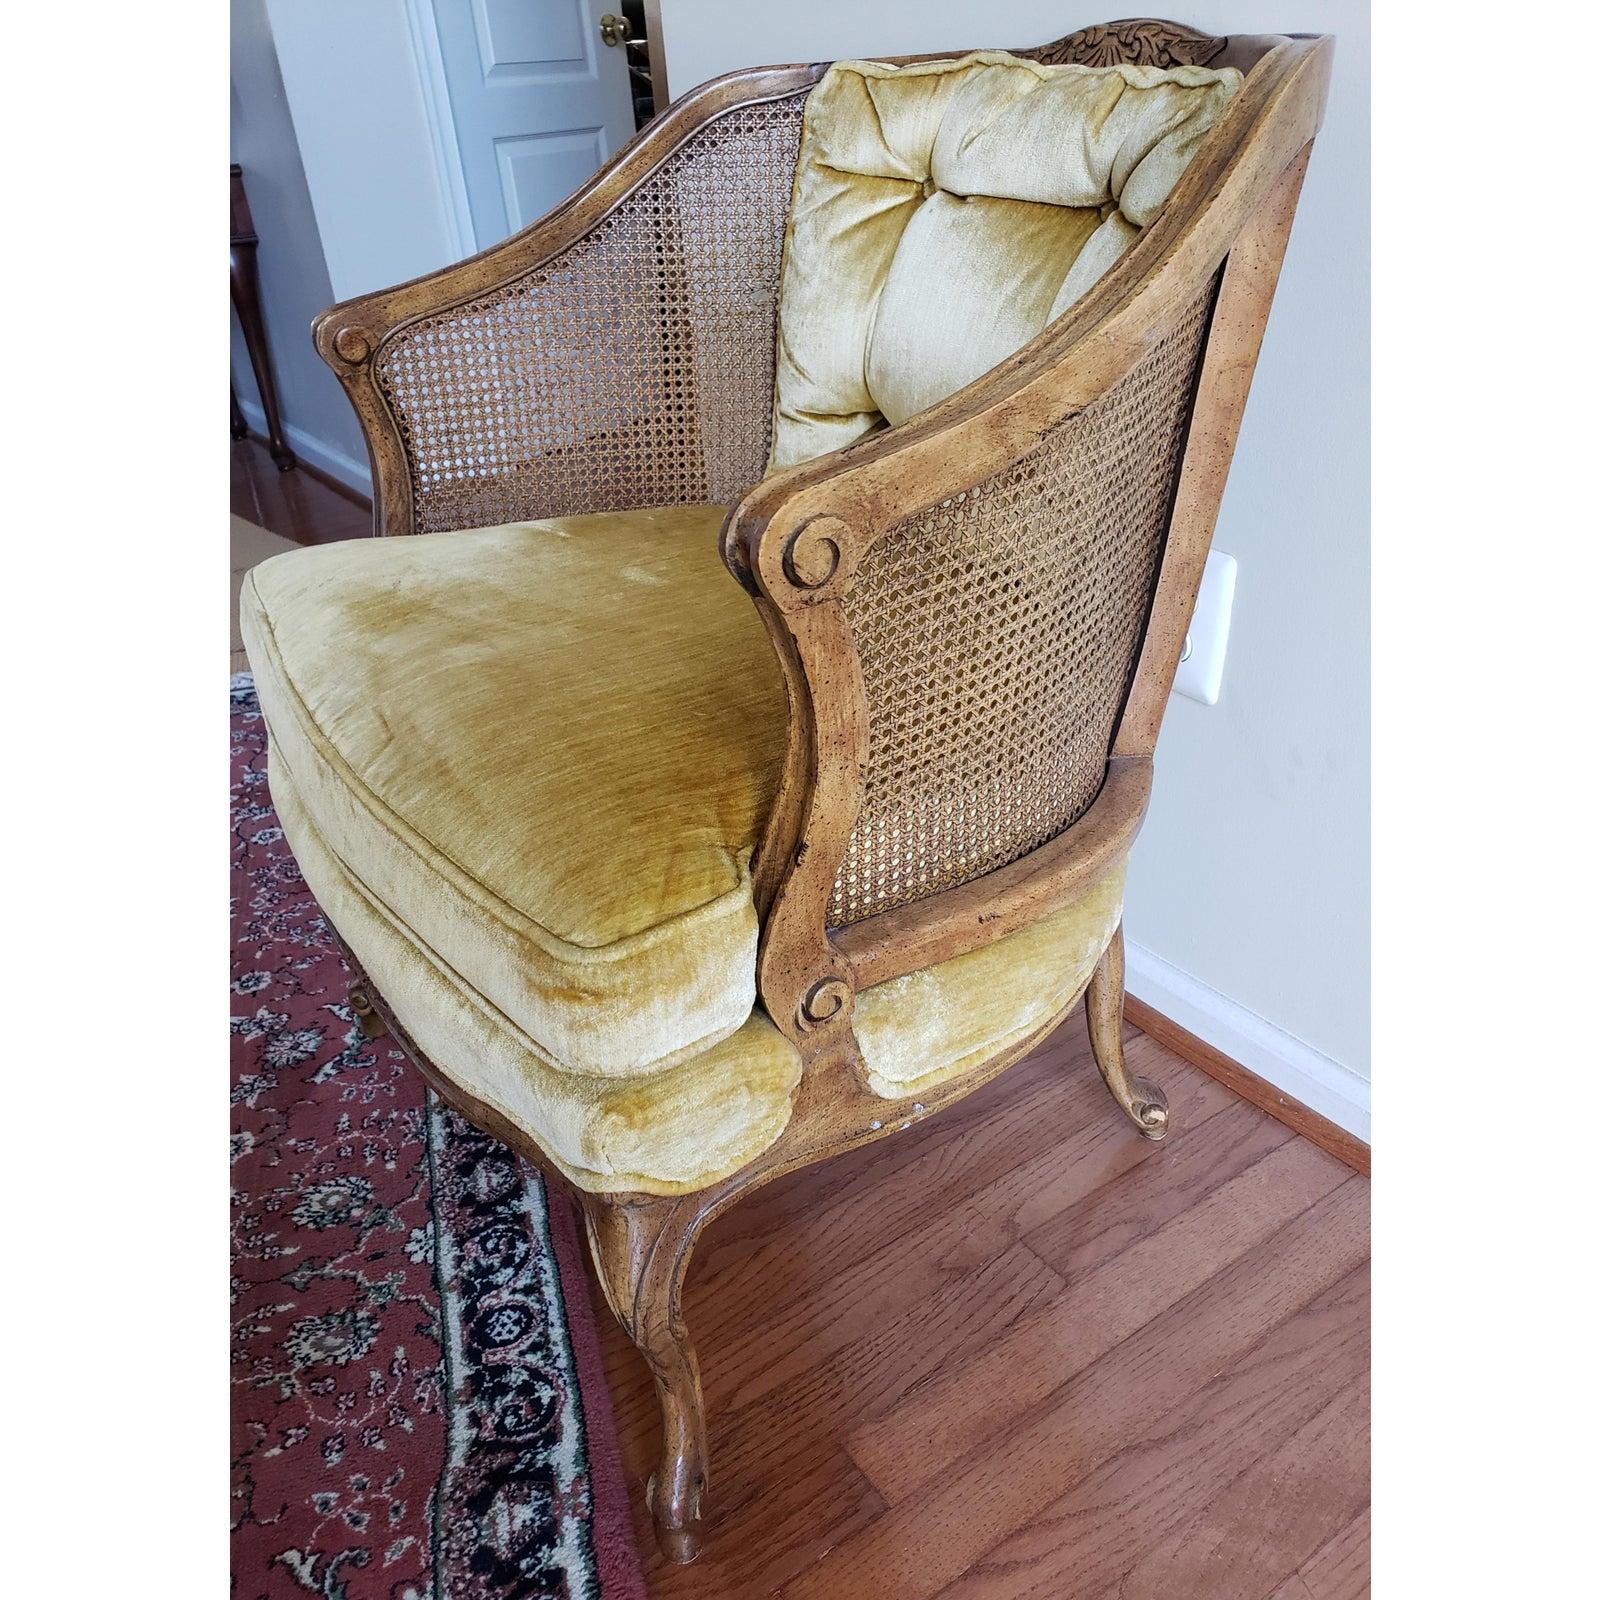 Vintage French caned Bergere armchair with carved crest rail and dainty cabriolet legs. 
Yellow Mustard velvet upholstery in very good condition.
Comes with removable seat cushion
Measures 25.5